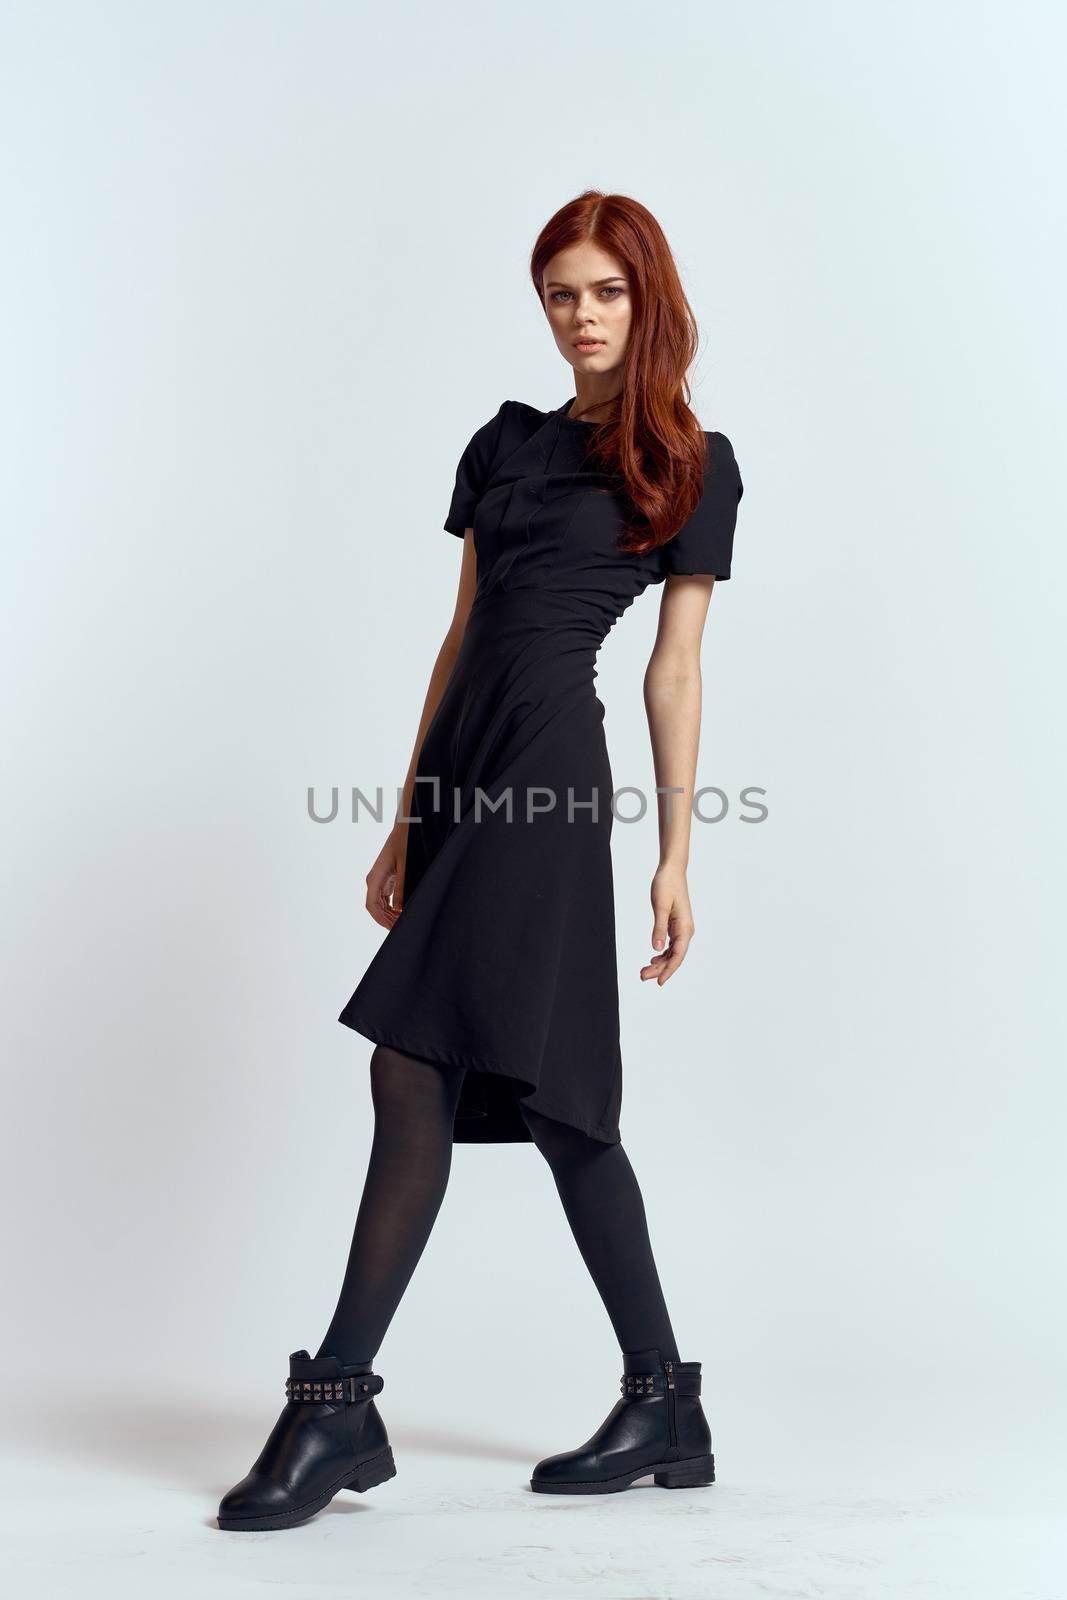 A woman in a black dress on a light background and pantyhose shoes red hair and pose in full growth by SHOTPRIME